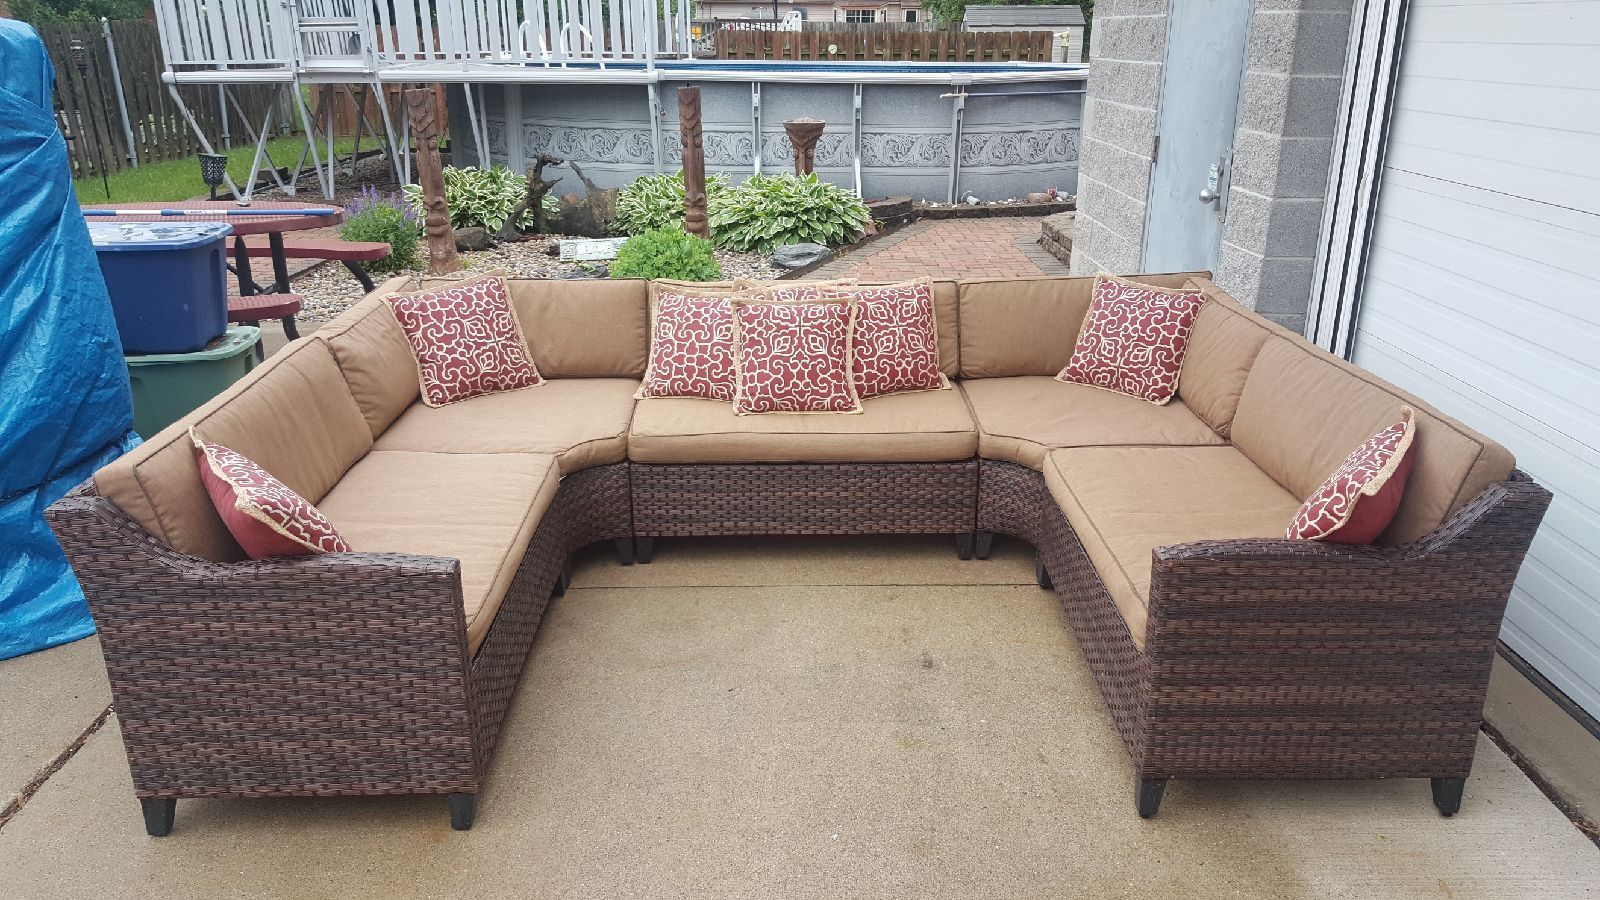 Patio furniture couch